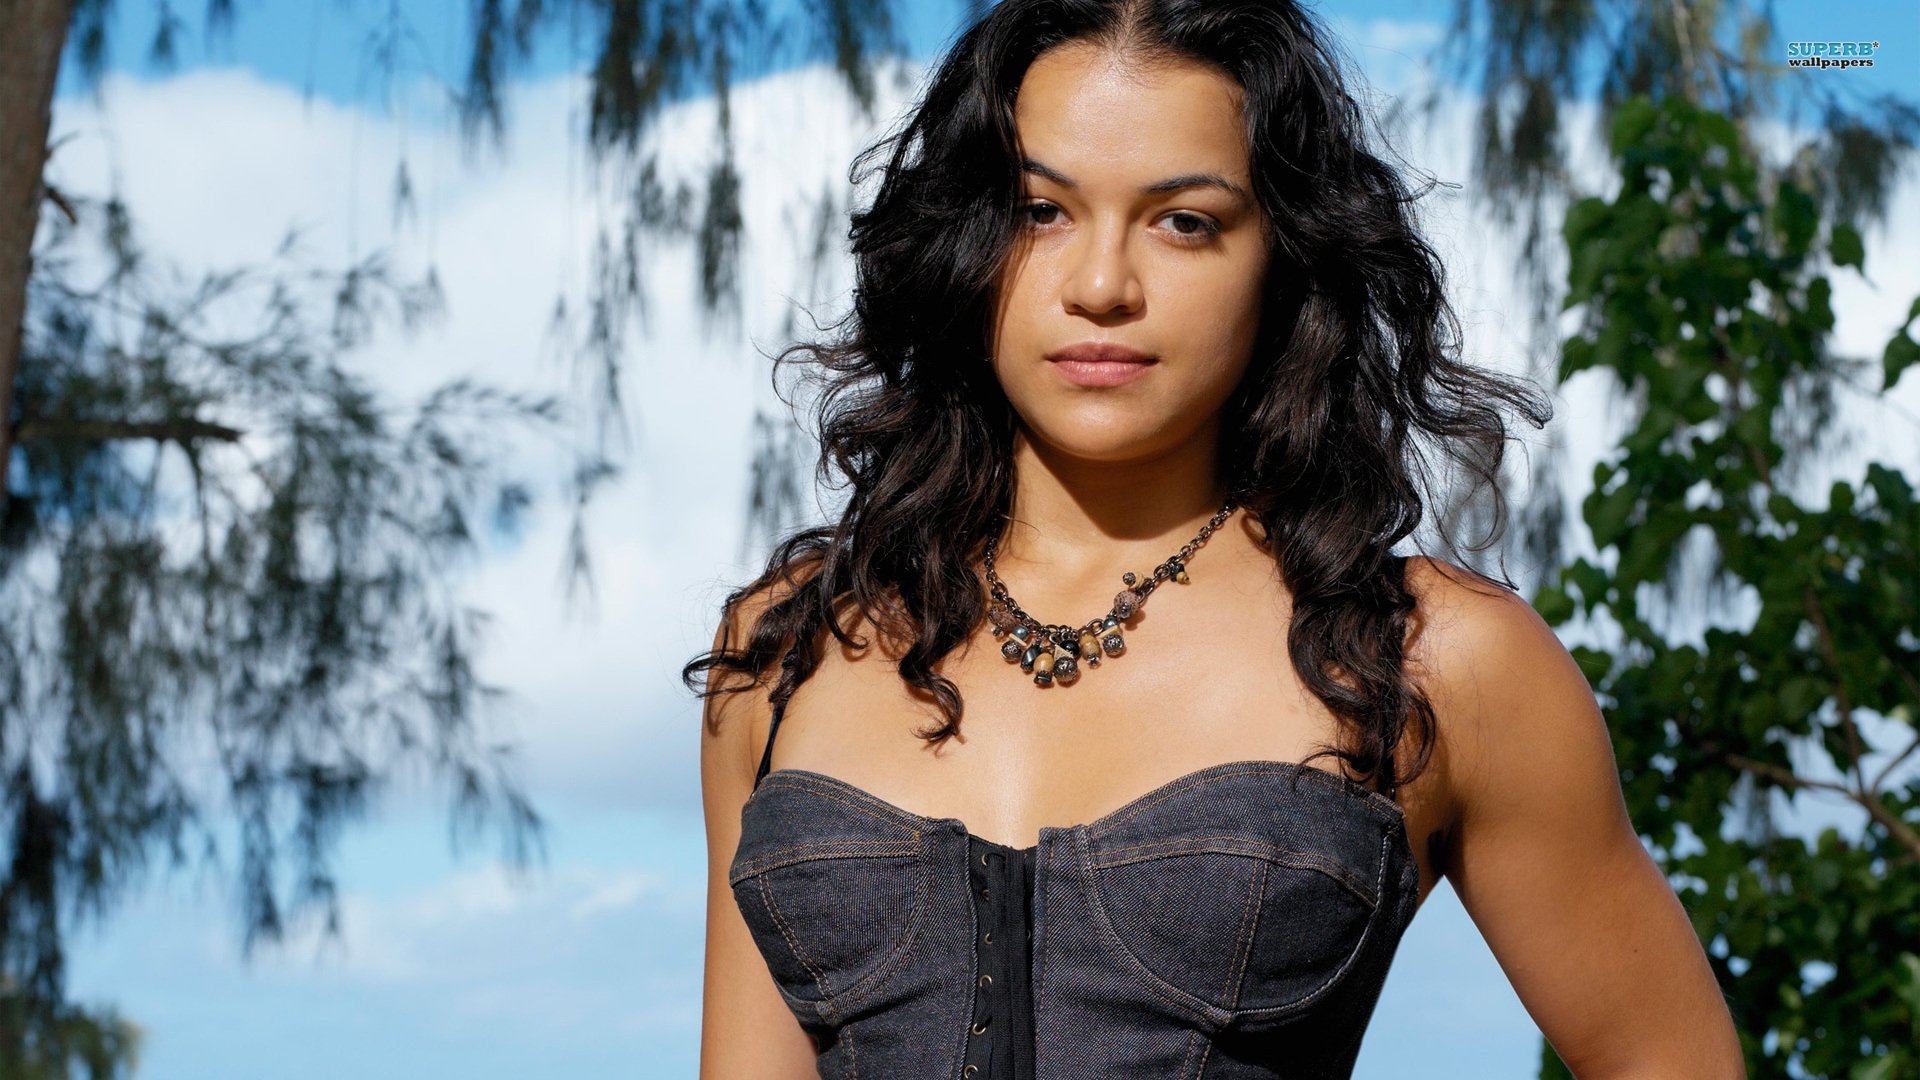 Michelle Rodriguez Hd Wallpaper Background Image 1920x1080